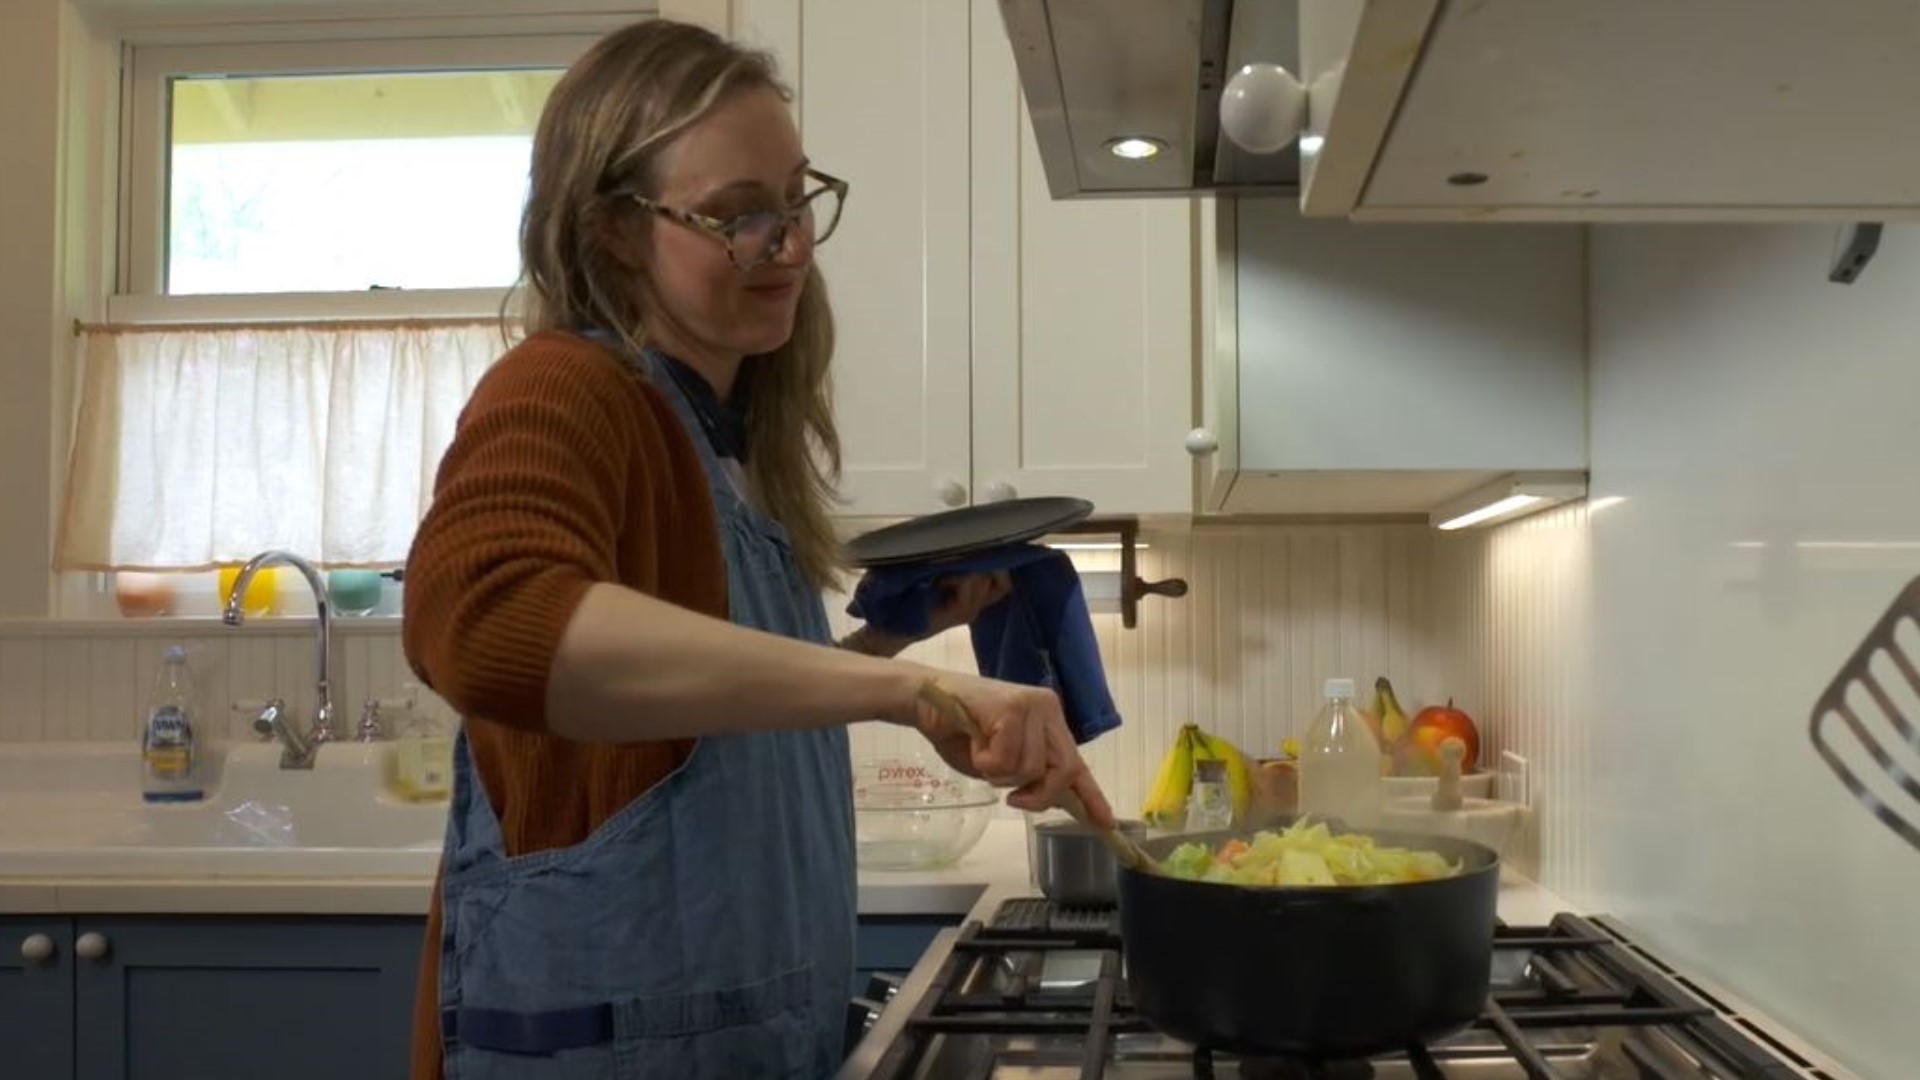 Caroline Wright's "Soup Club" features 80 plant-based soup and stew recipes. #k5evening